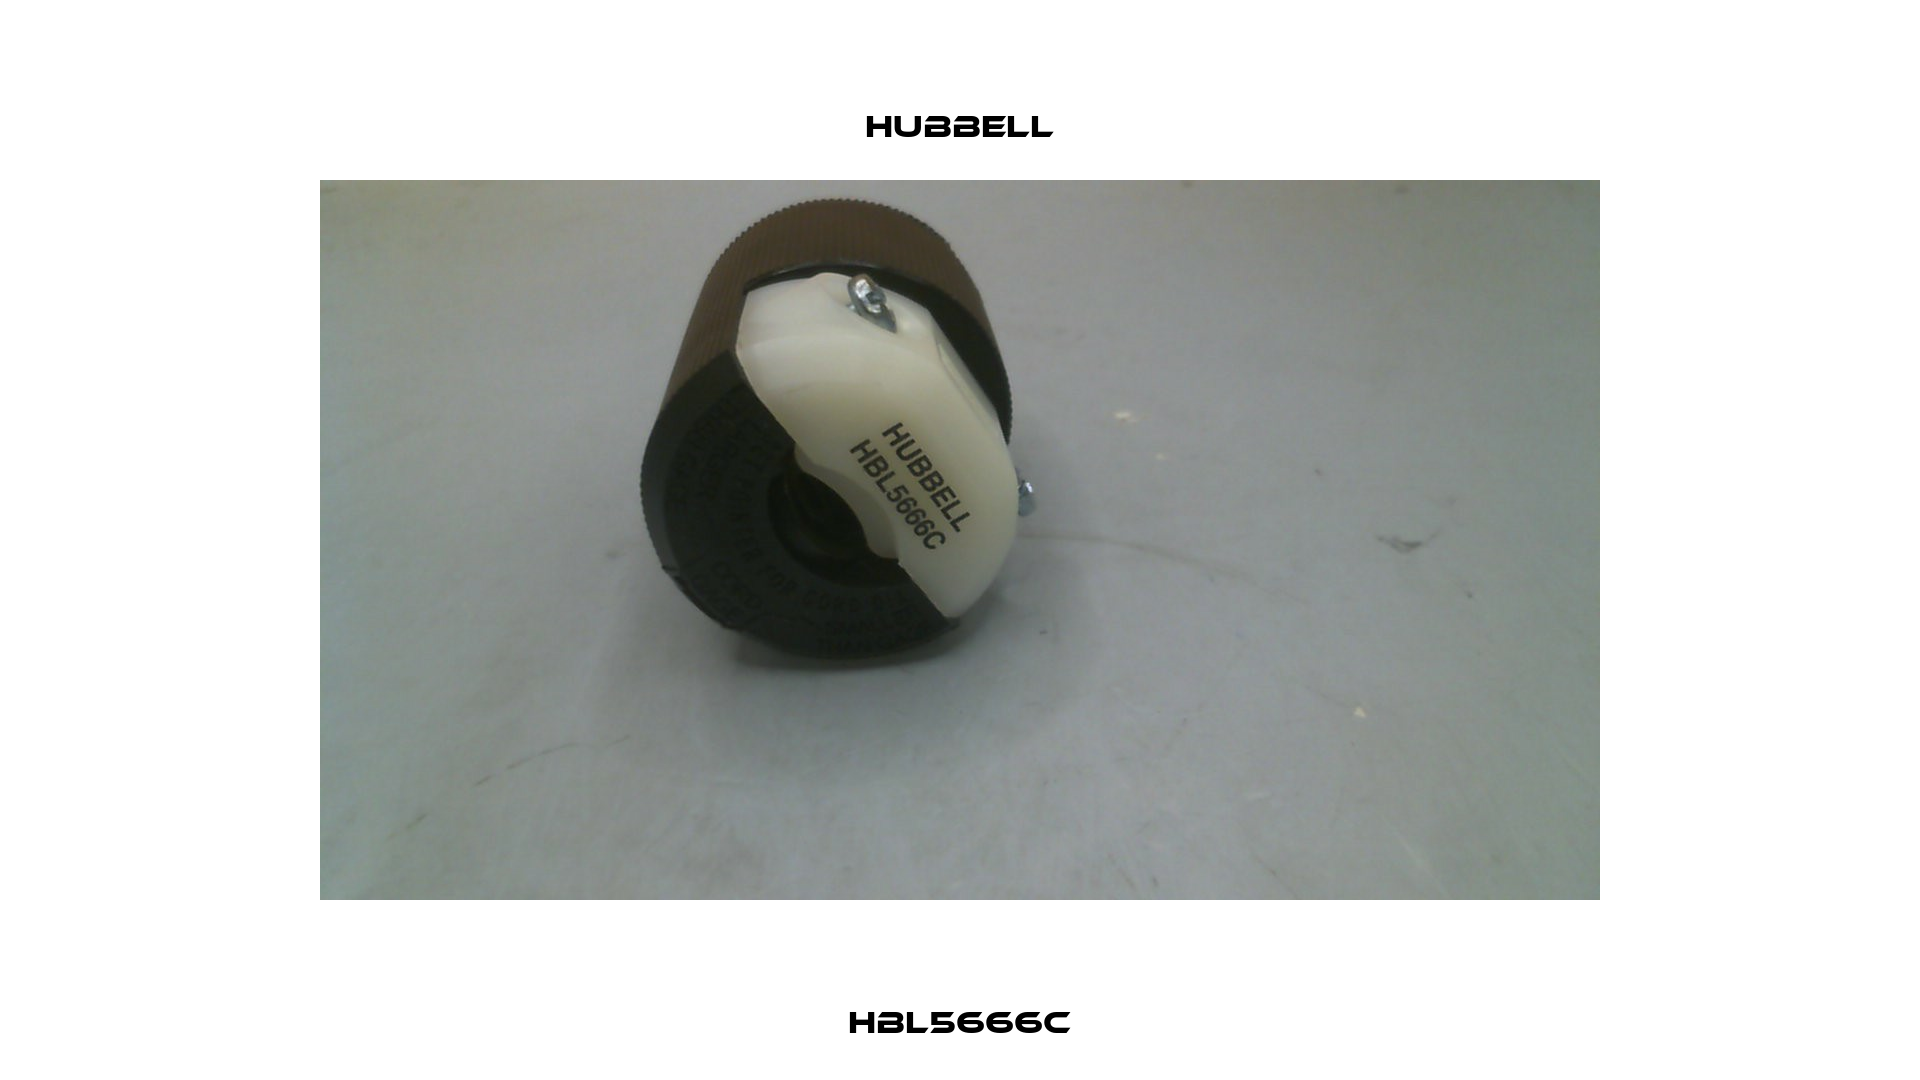 HBL5666C Hubbell